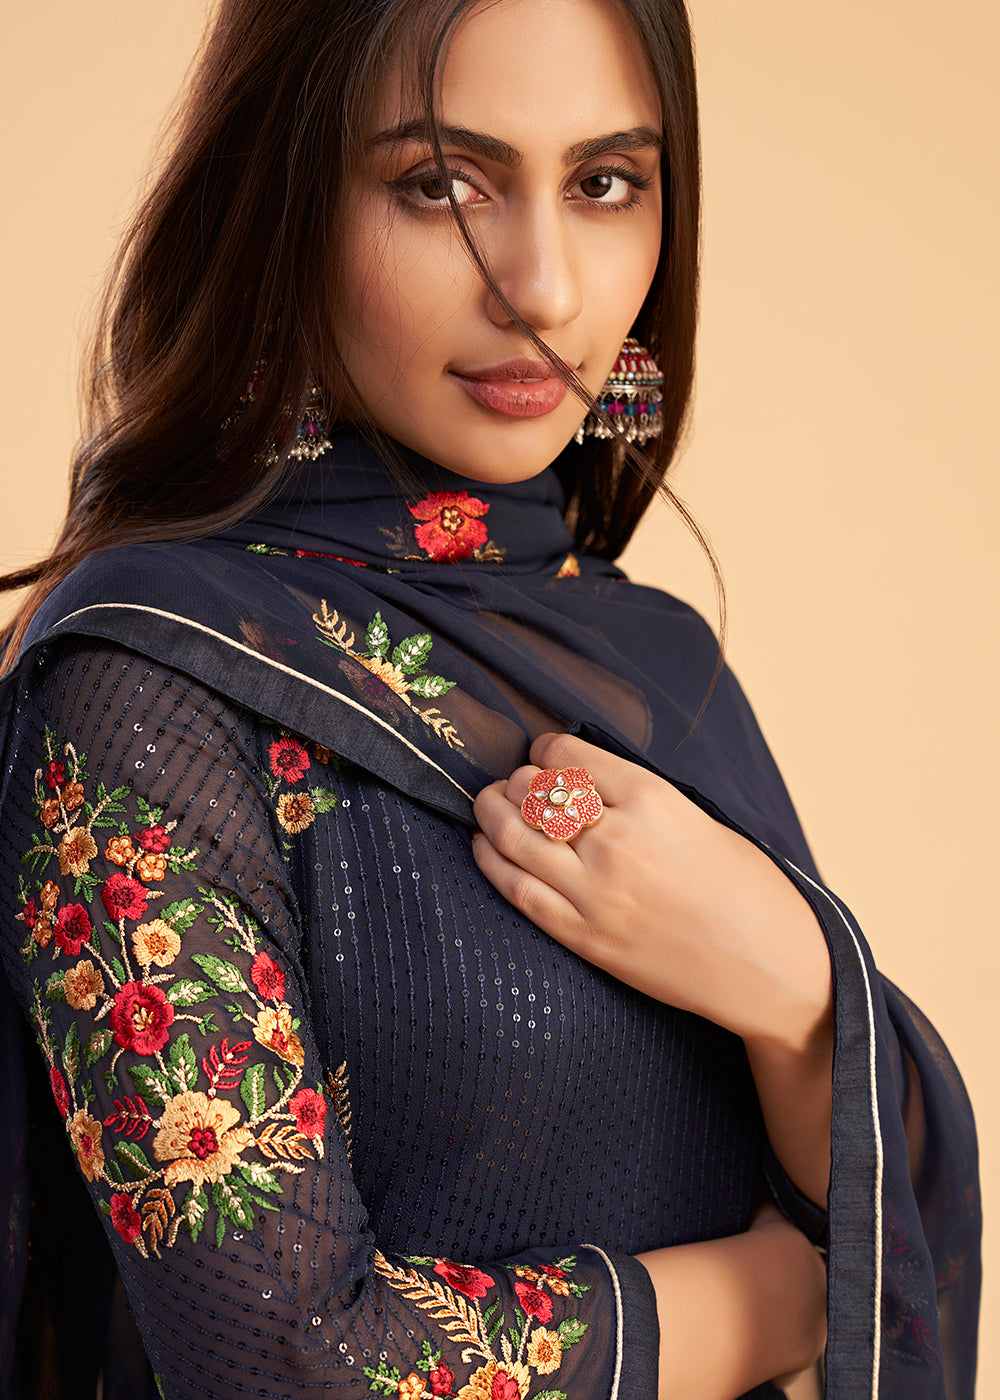 Buy Now Floral Embroidered Navy Blue Indian Wedding Wear Salwar Suit Online in USA, UK, Canada, Germany, Australia & Worldwide at Empress Clothing.